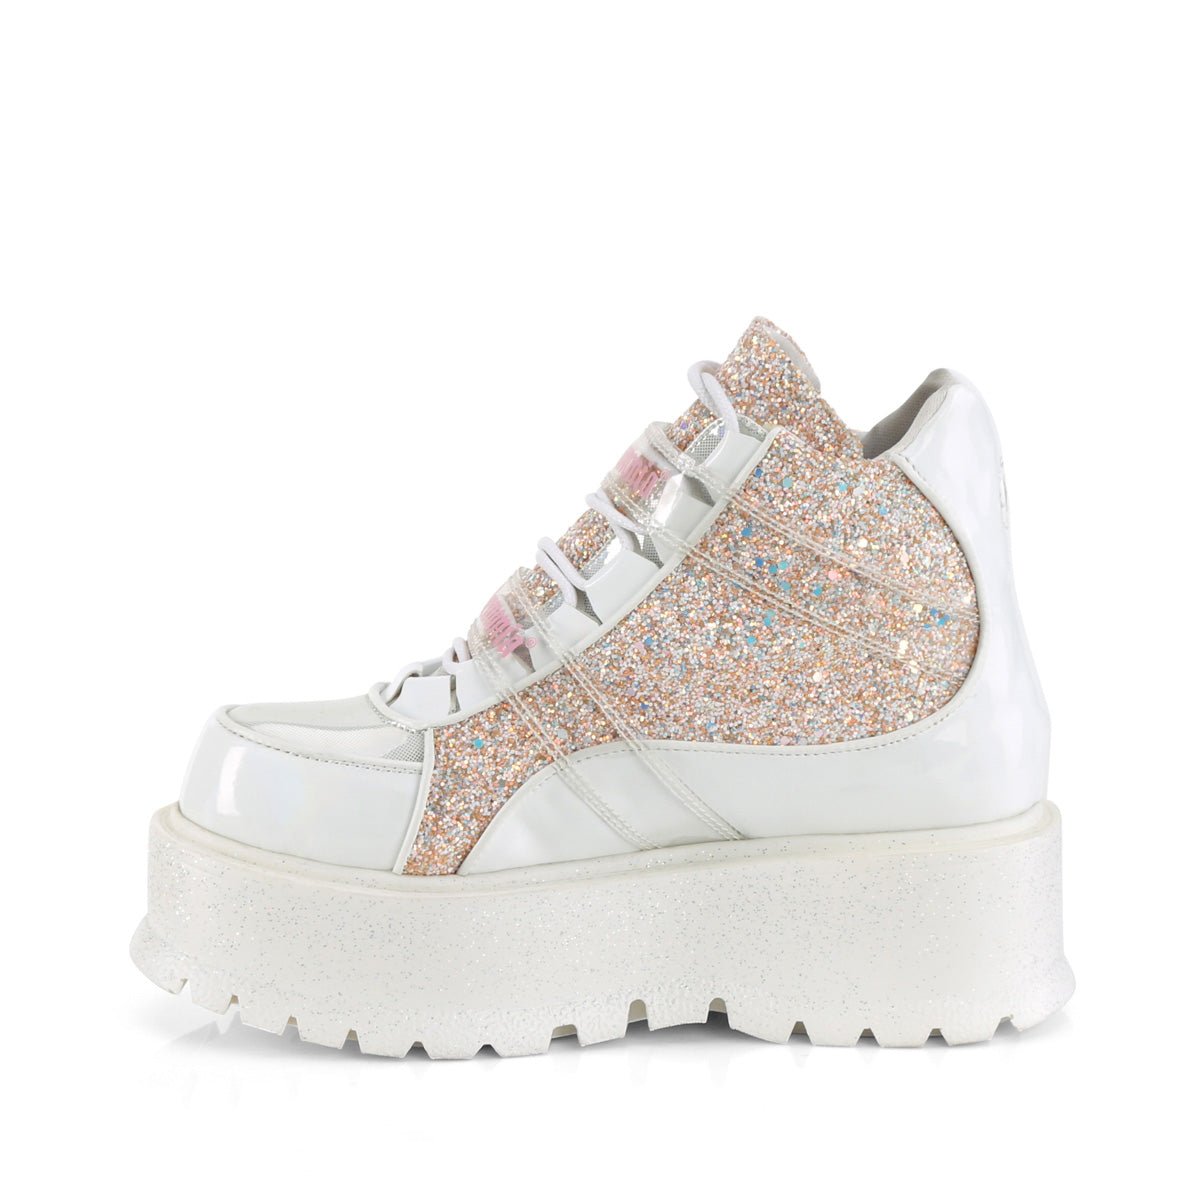 Too Fast | Demonia Slacker 50 | White &amp; Baby Pink Holographic Patent Leather &amp; Glitter Women&#39;s Ankle Boots